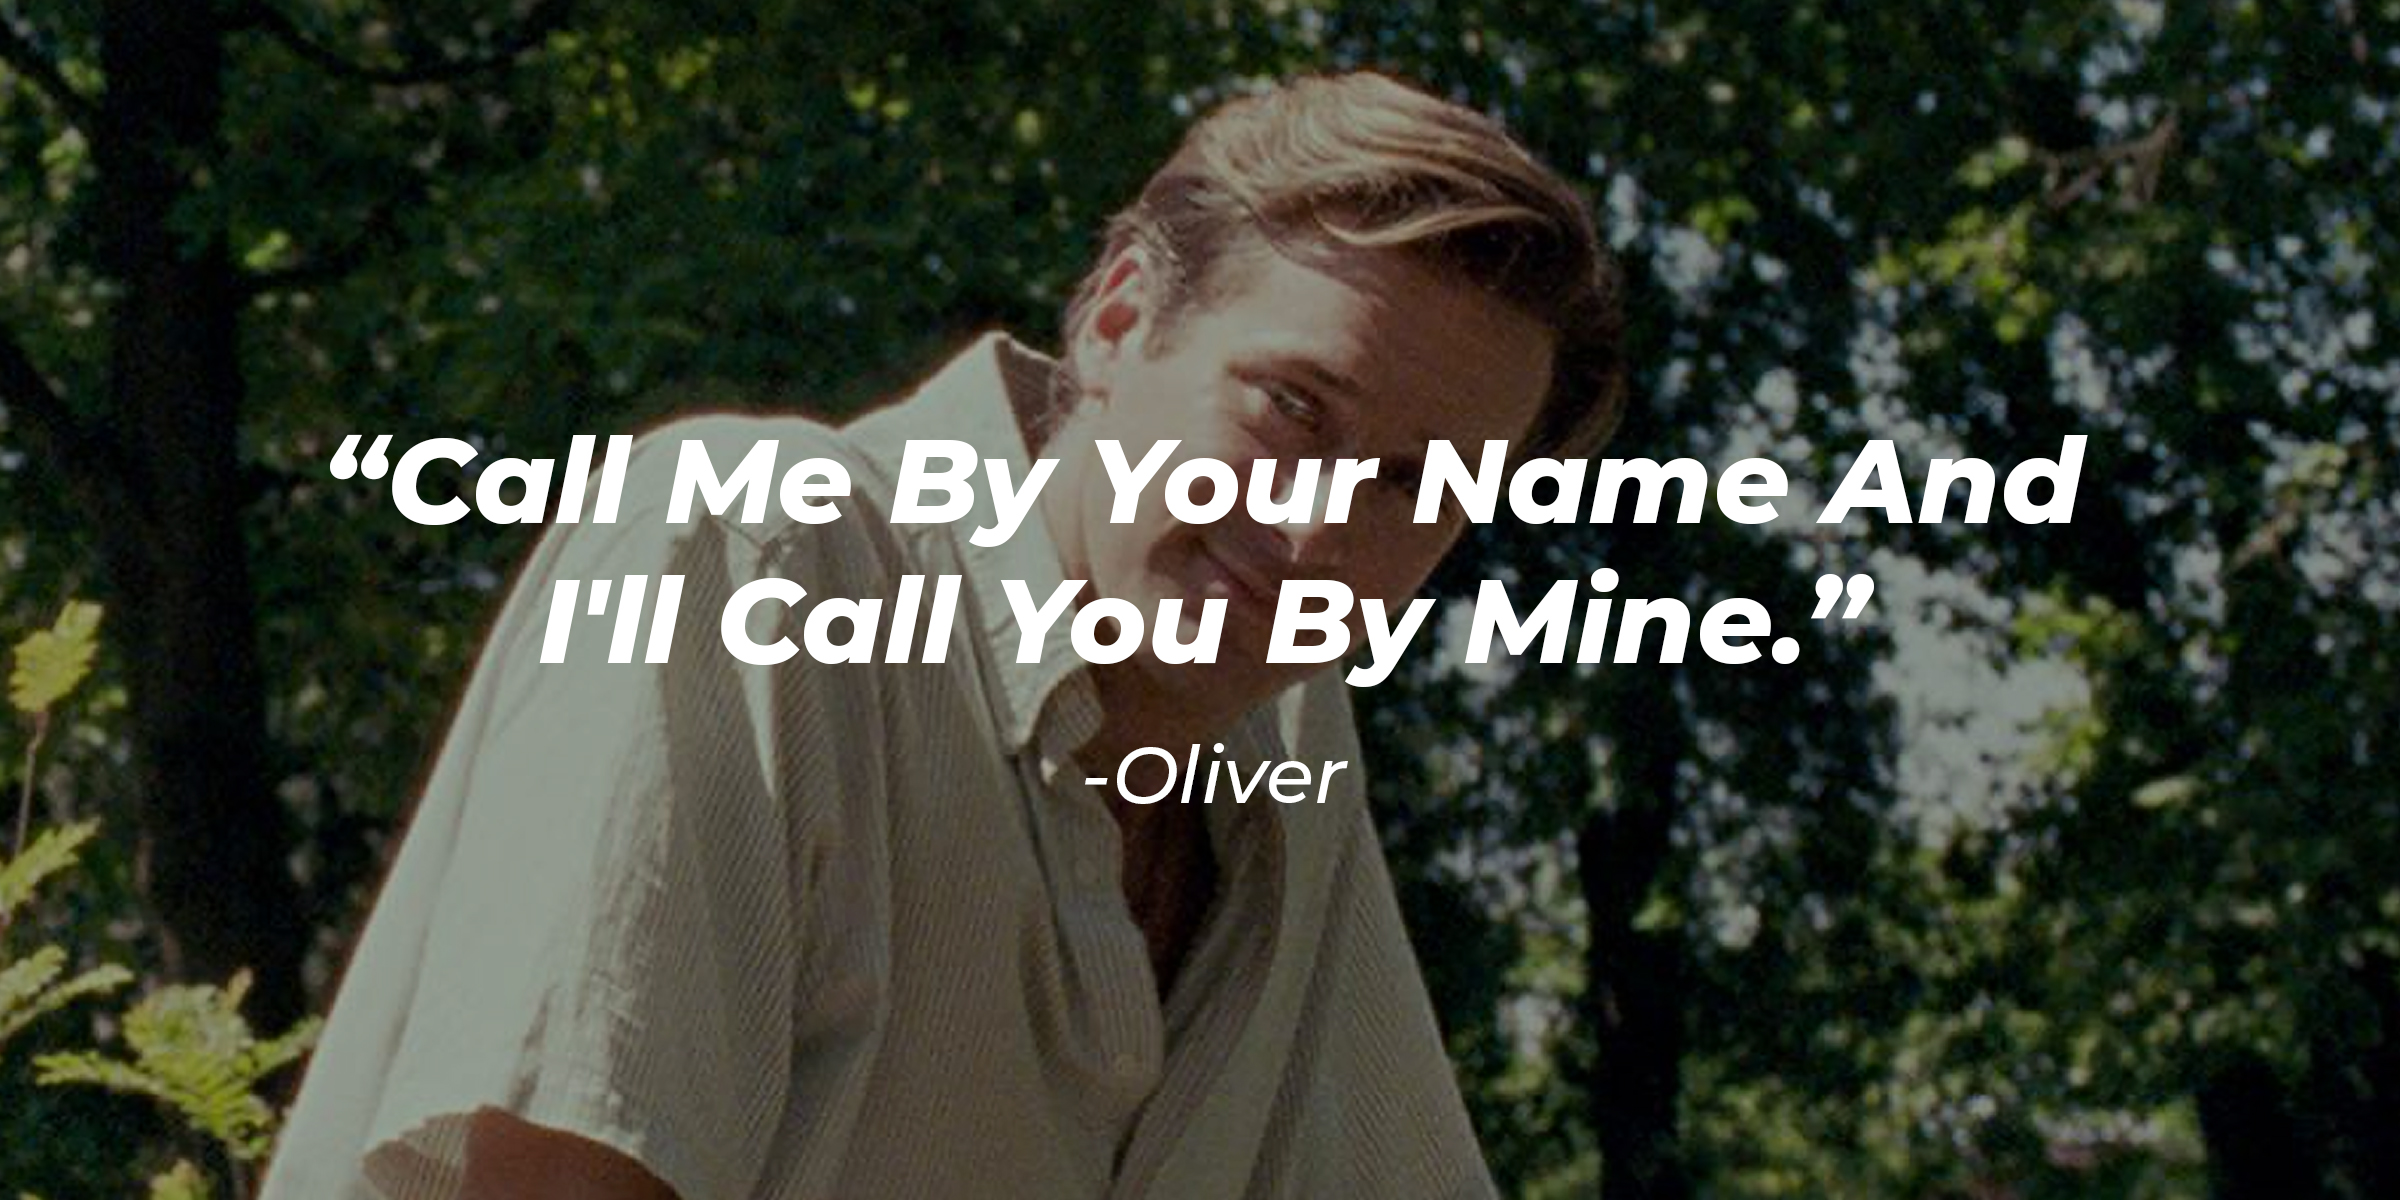 Oliver's quote, "Call Me By Your Name And I'll Call You By Mine." | Source: Facebook.com/CallMeByYourNameFilm